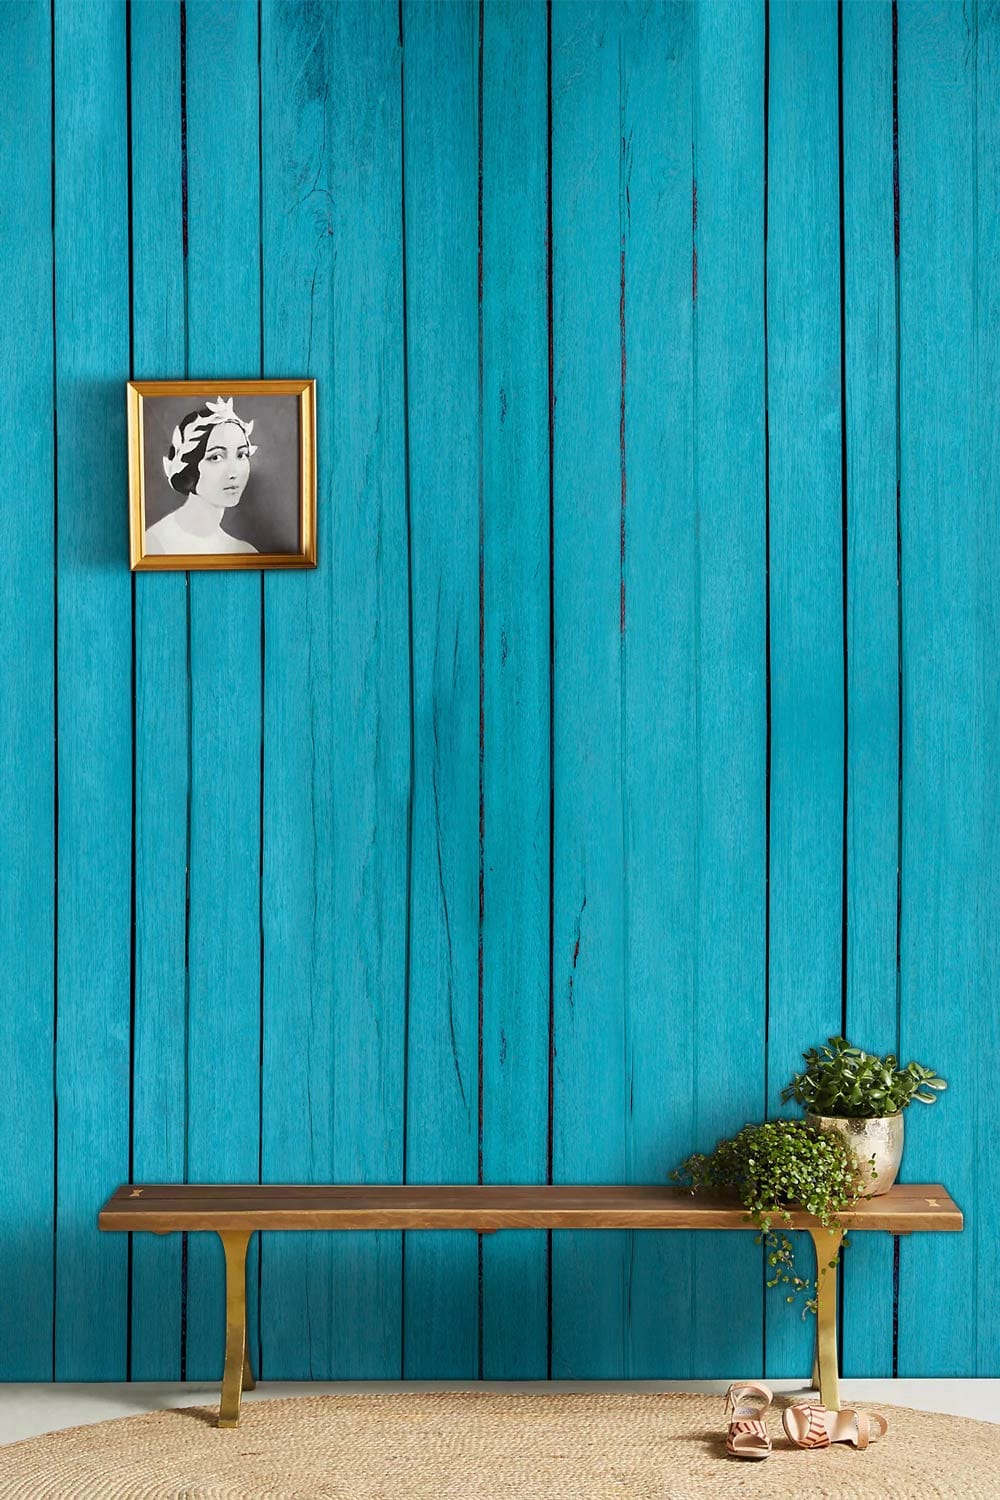 hallway wall murals in turquoise with a wood grain texture